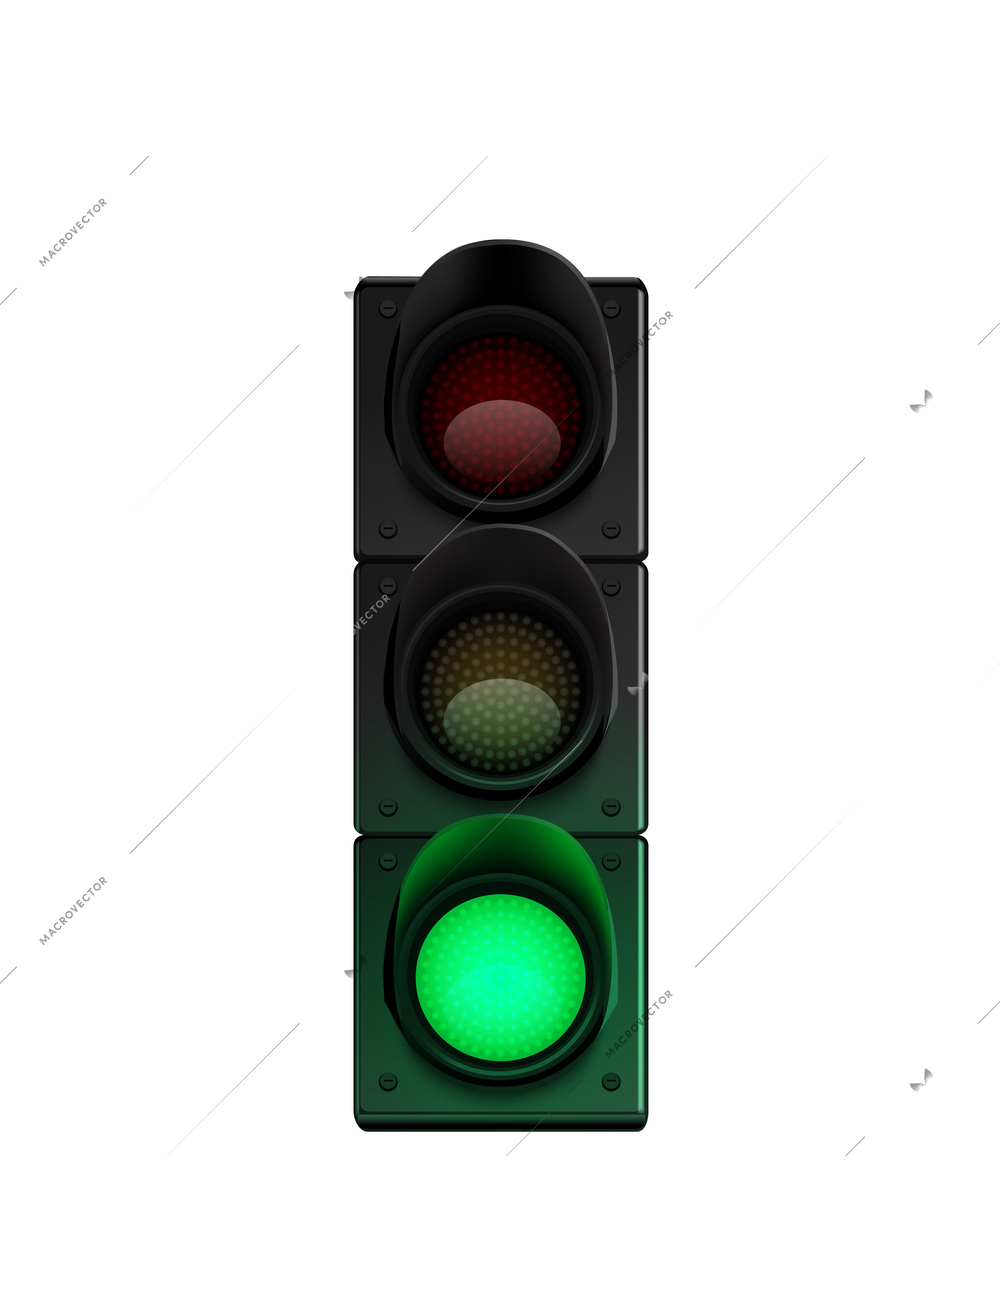 Traffic lights realistic composition with traffic light icon with glowing light on blank background vector illustration